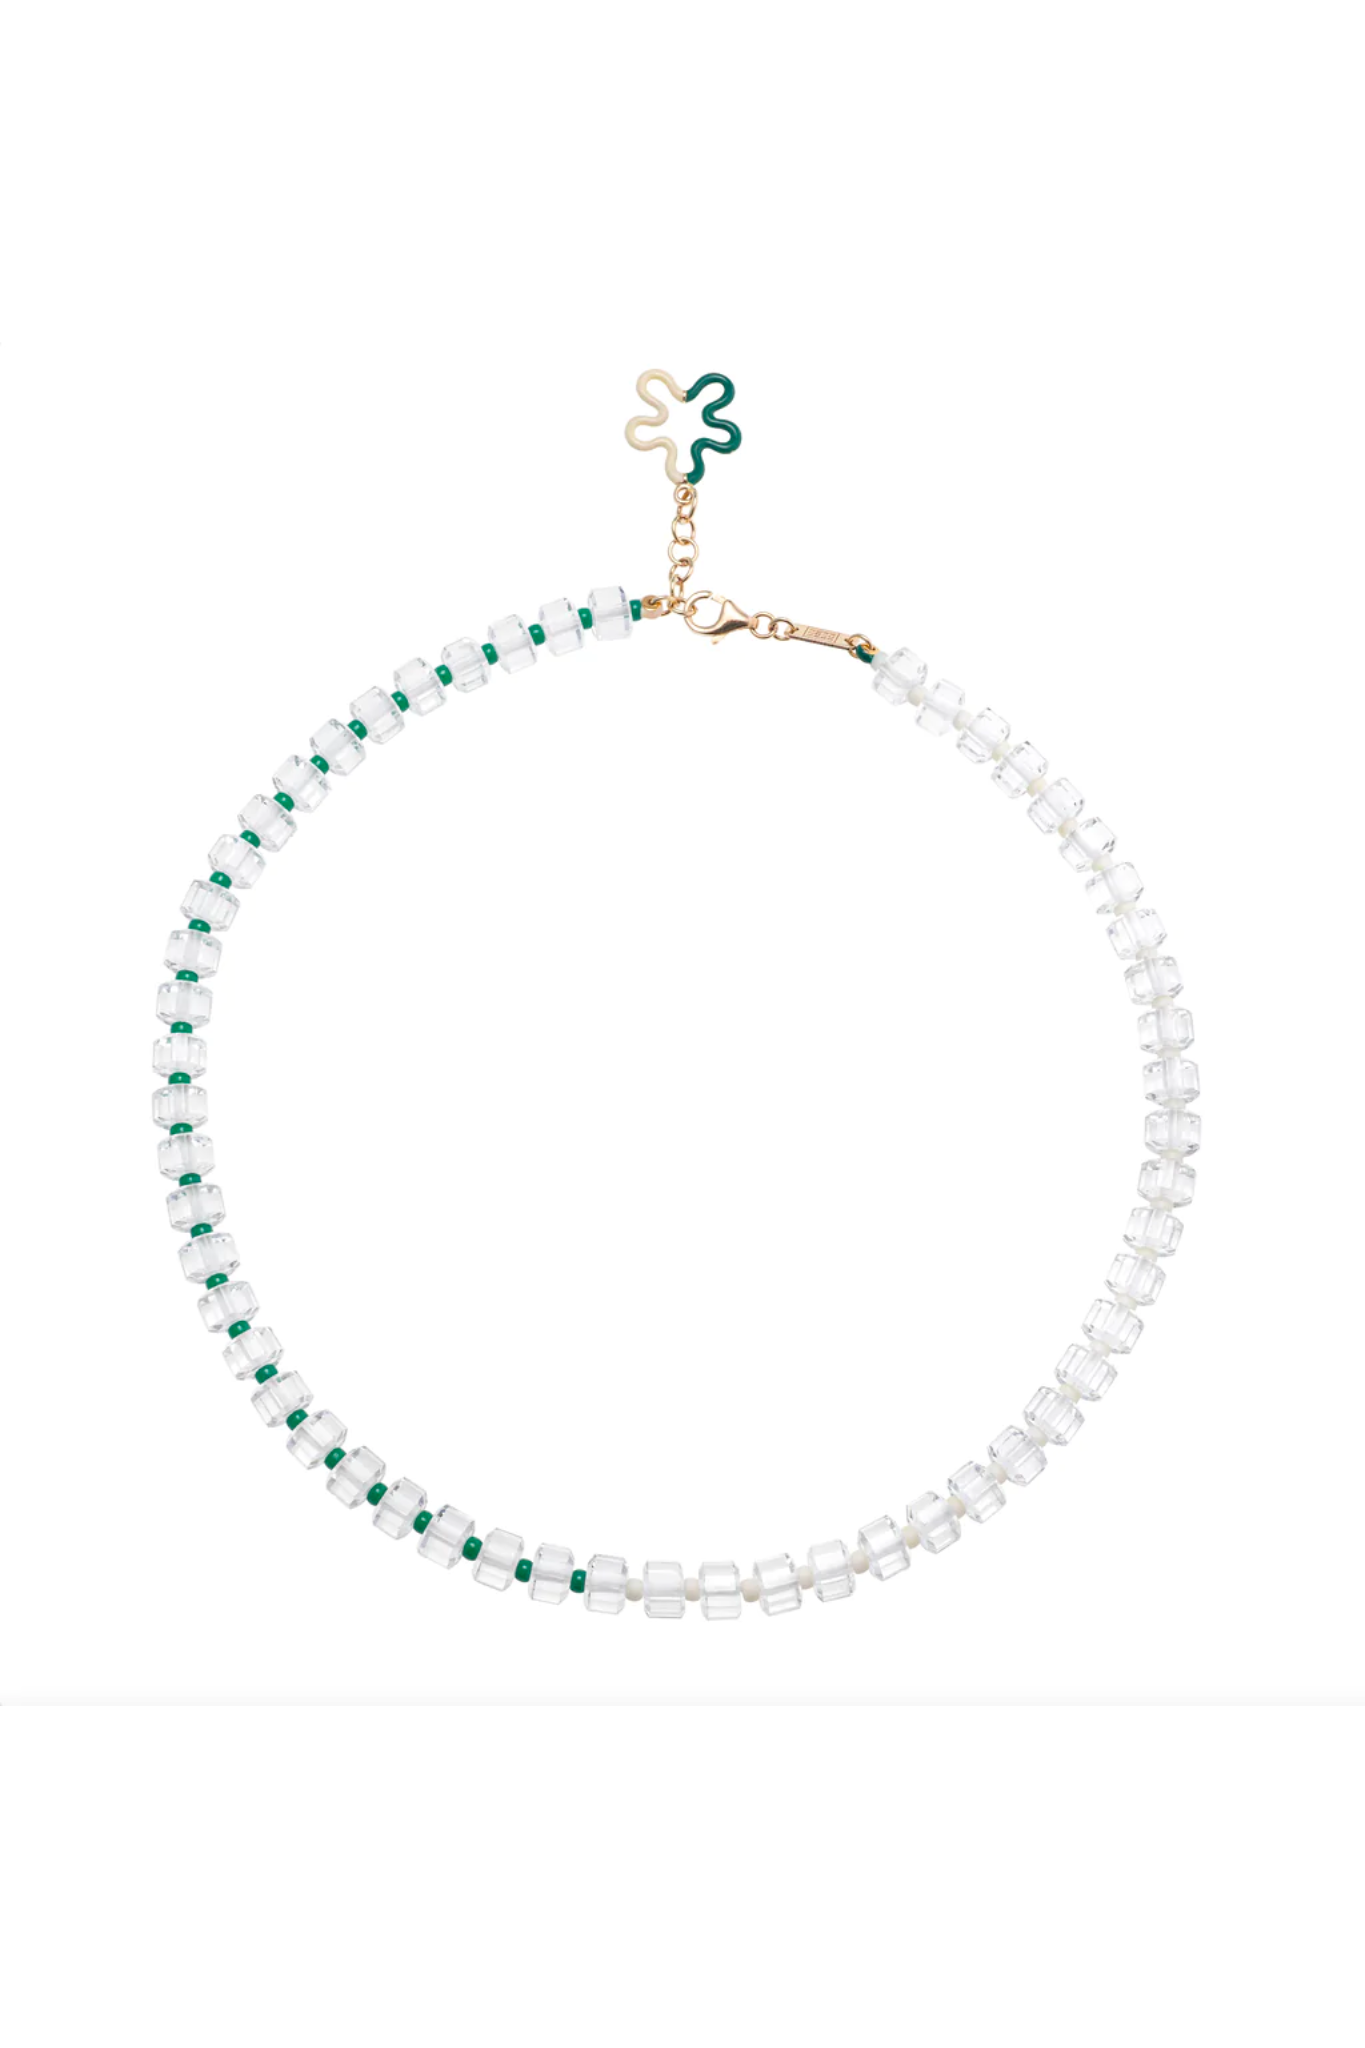 Bea Bongiasca B Beaded Necklace with Evergreen and Panna Crystal Beads and Floral Charm